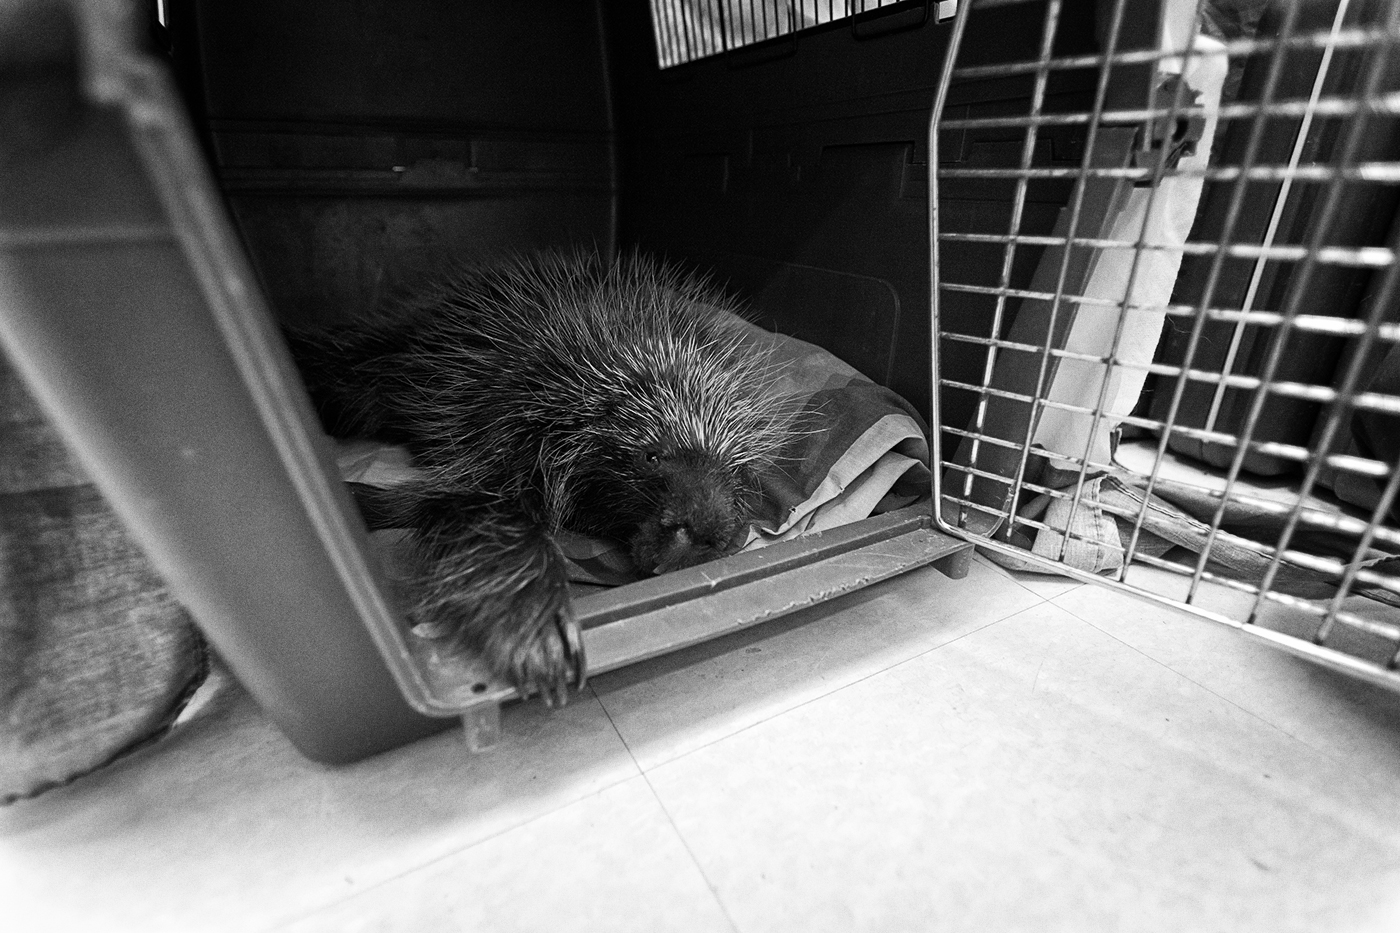 Porcupine in a crate at the Toronto Wildlife Centre